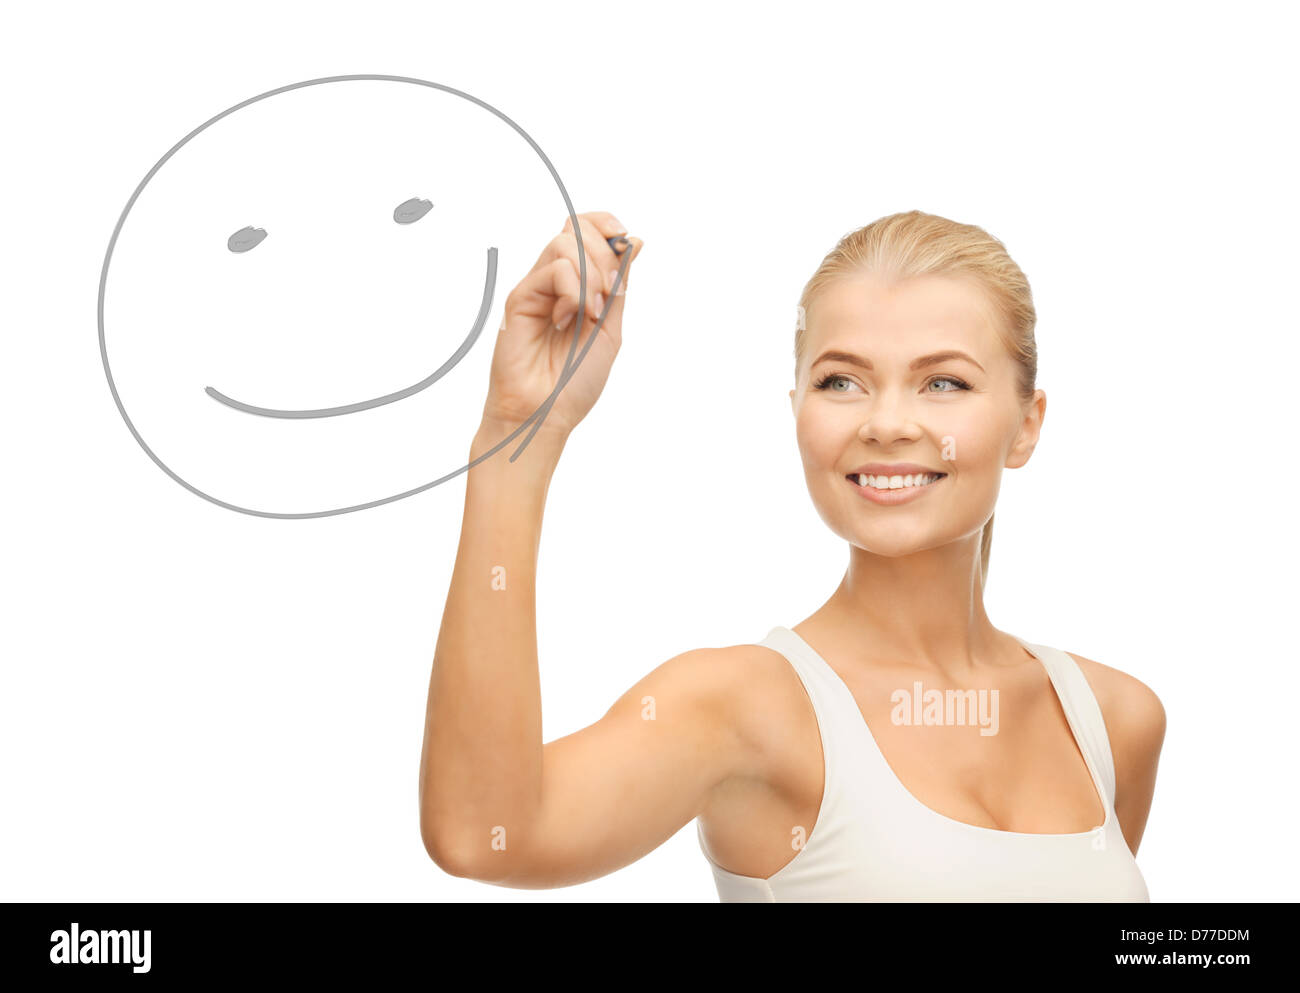 woman drawing happy face Stock Photo